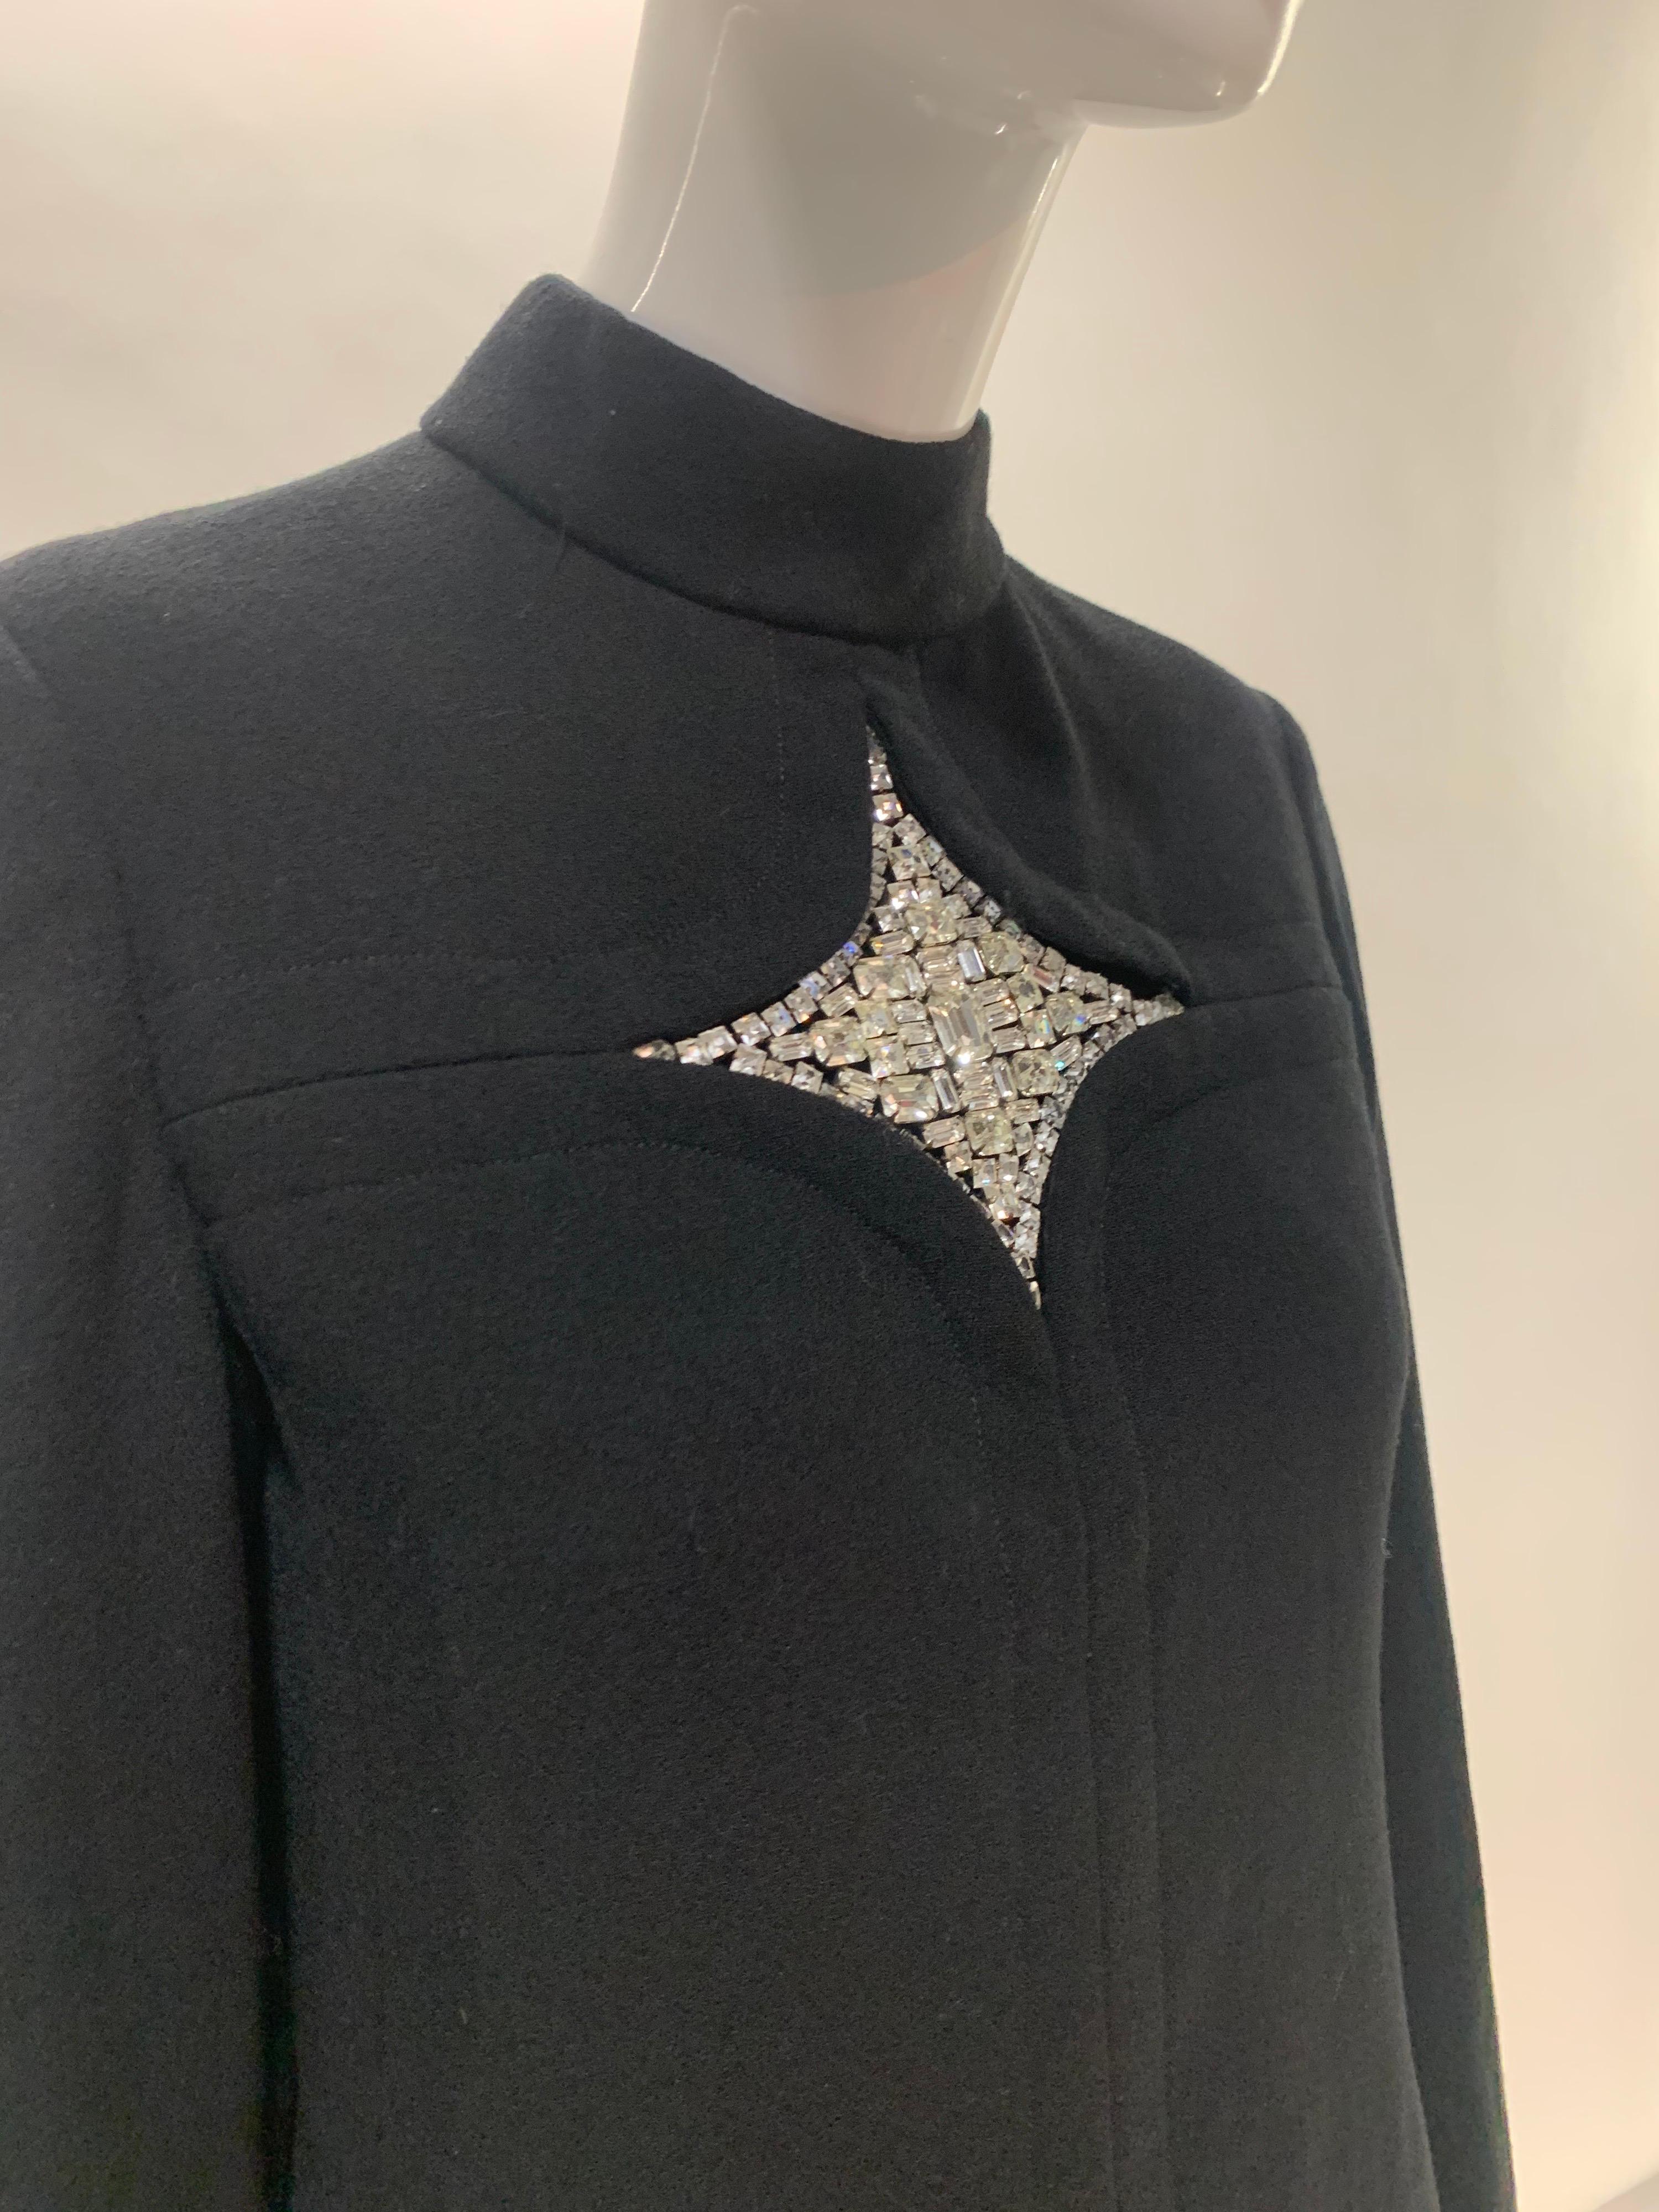 1960s Mod Wool Crepe Tailored Cocktail Dress w/ Rhinestone Star Inset at Center In Excellent Condition For Sale In Gresham, OR